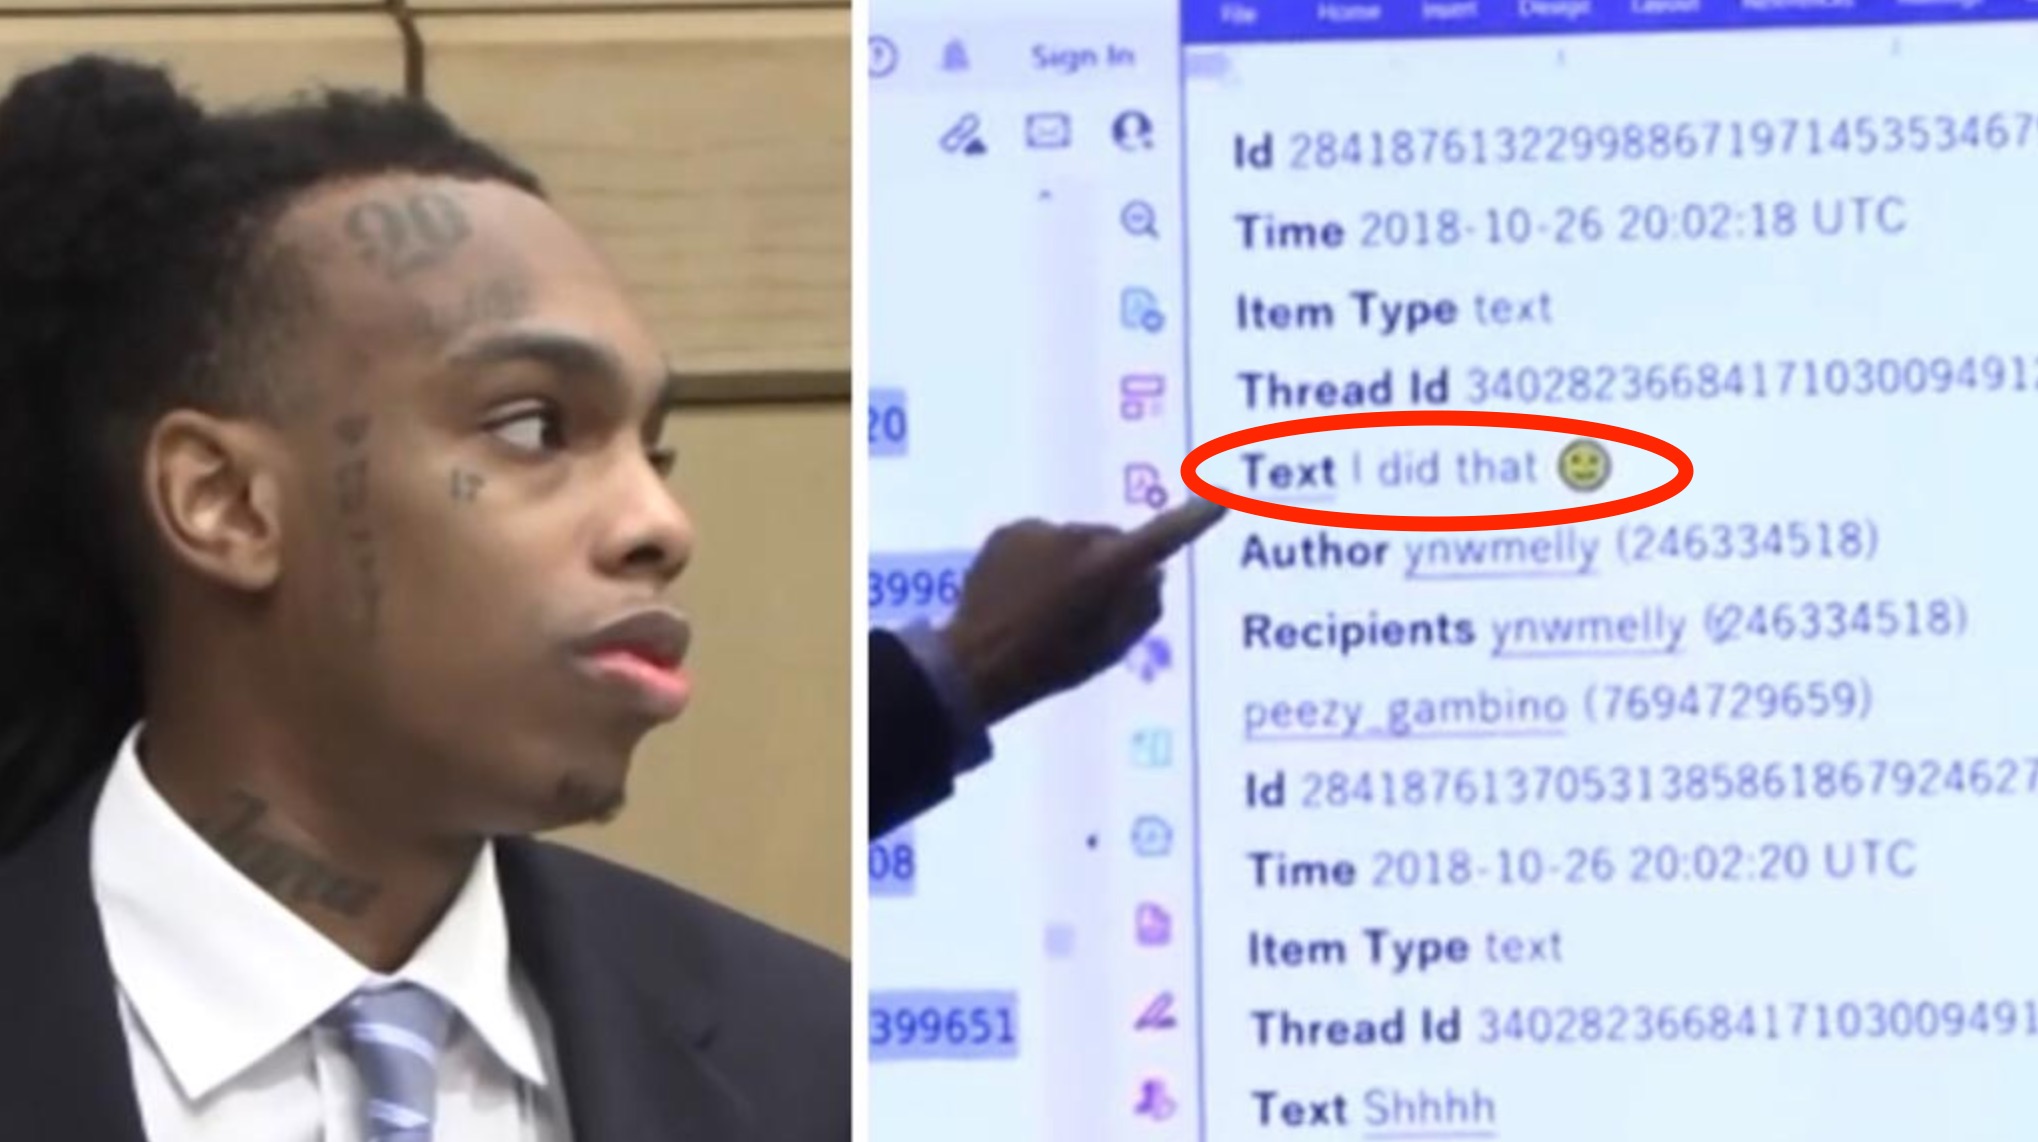 'I did that' YNW Melly Confessed to Double Murder in This Text Message According to The State in Closing Argument - Watch Video